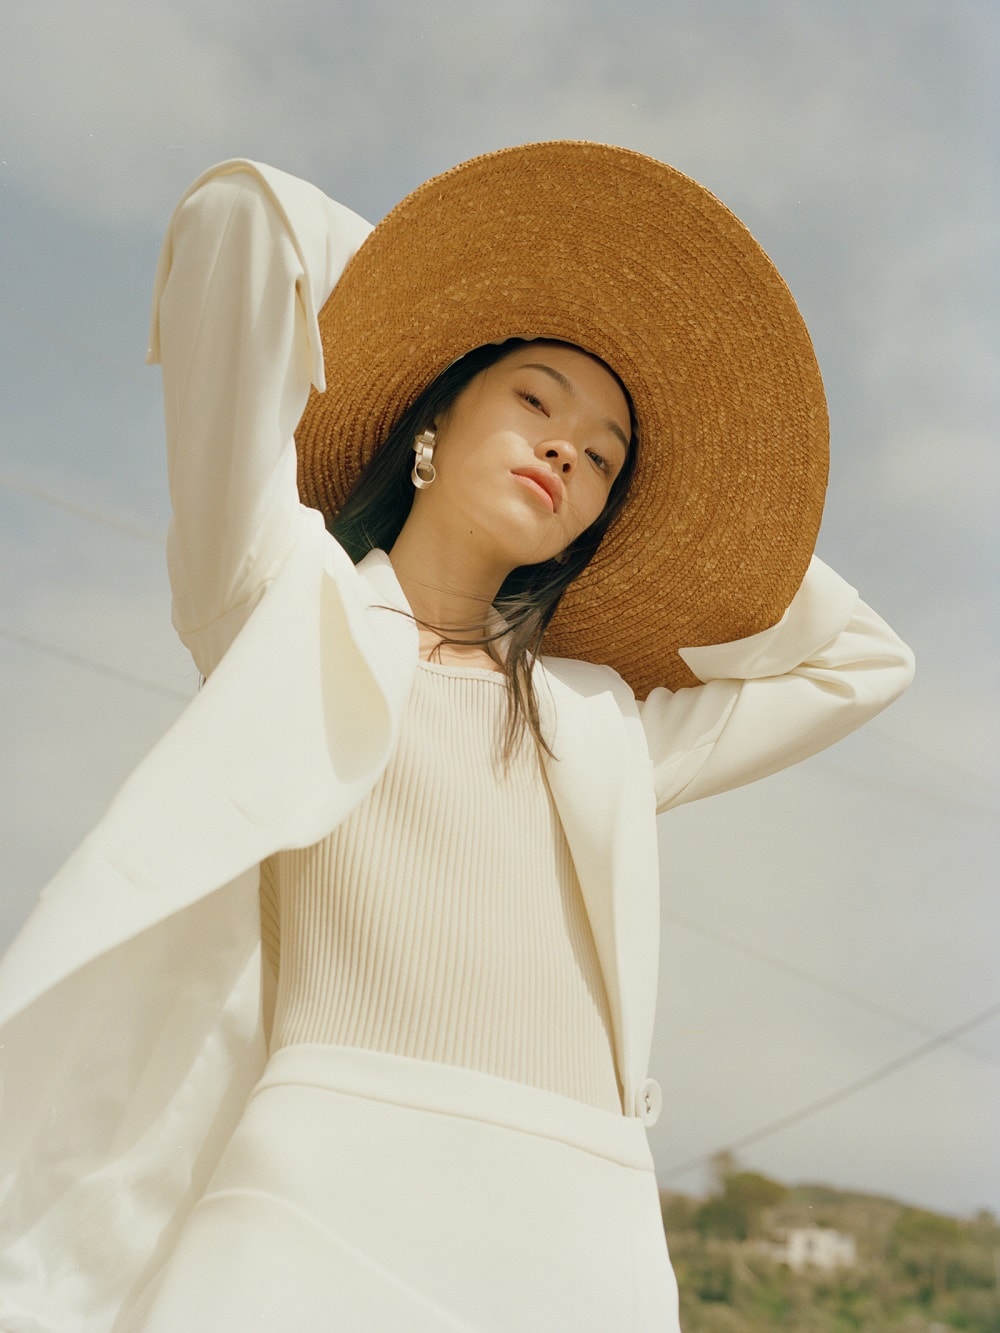 Layla Ong by Annie Lai for Kinfolk Magazine Summer 2018